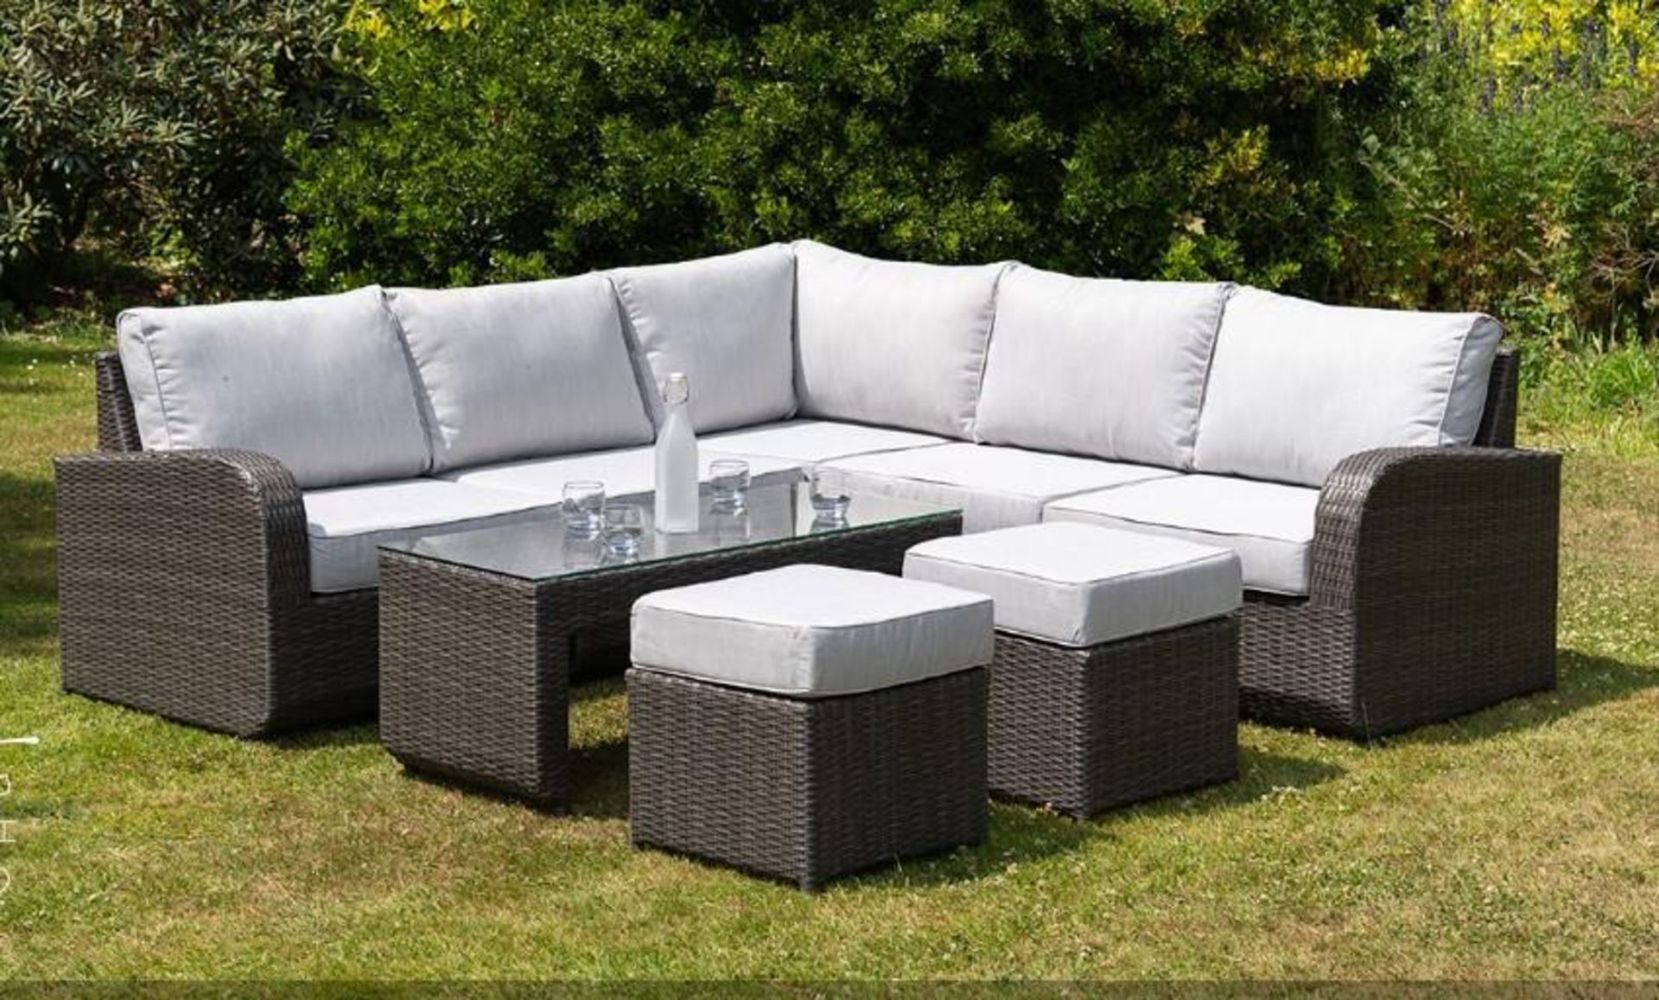 BRAND NEW LUXURY PREMIUM RATTAN FURNITURE INCLUDING 10 SEAT CORNER SETS, ROUND DINING TABLE SETS AND MUCH MORE. DELIVERY AVAILABLE